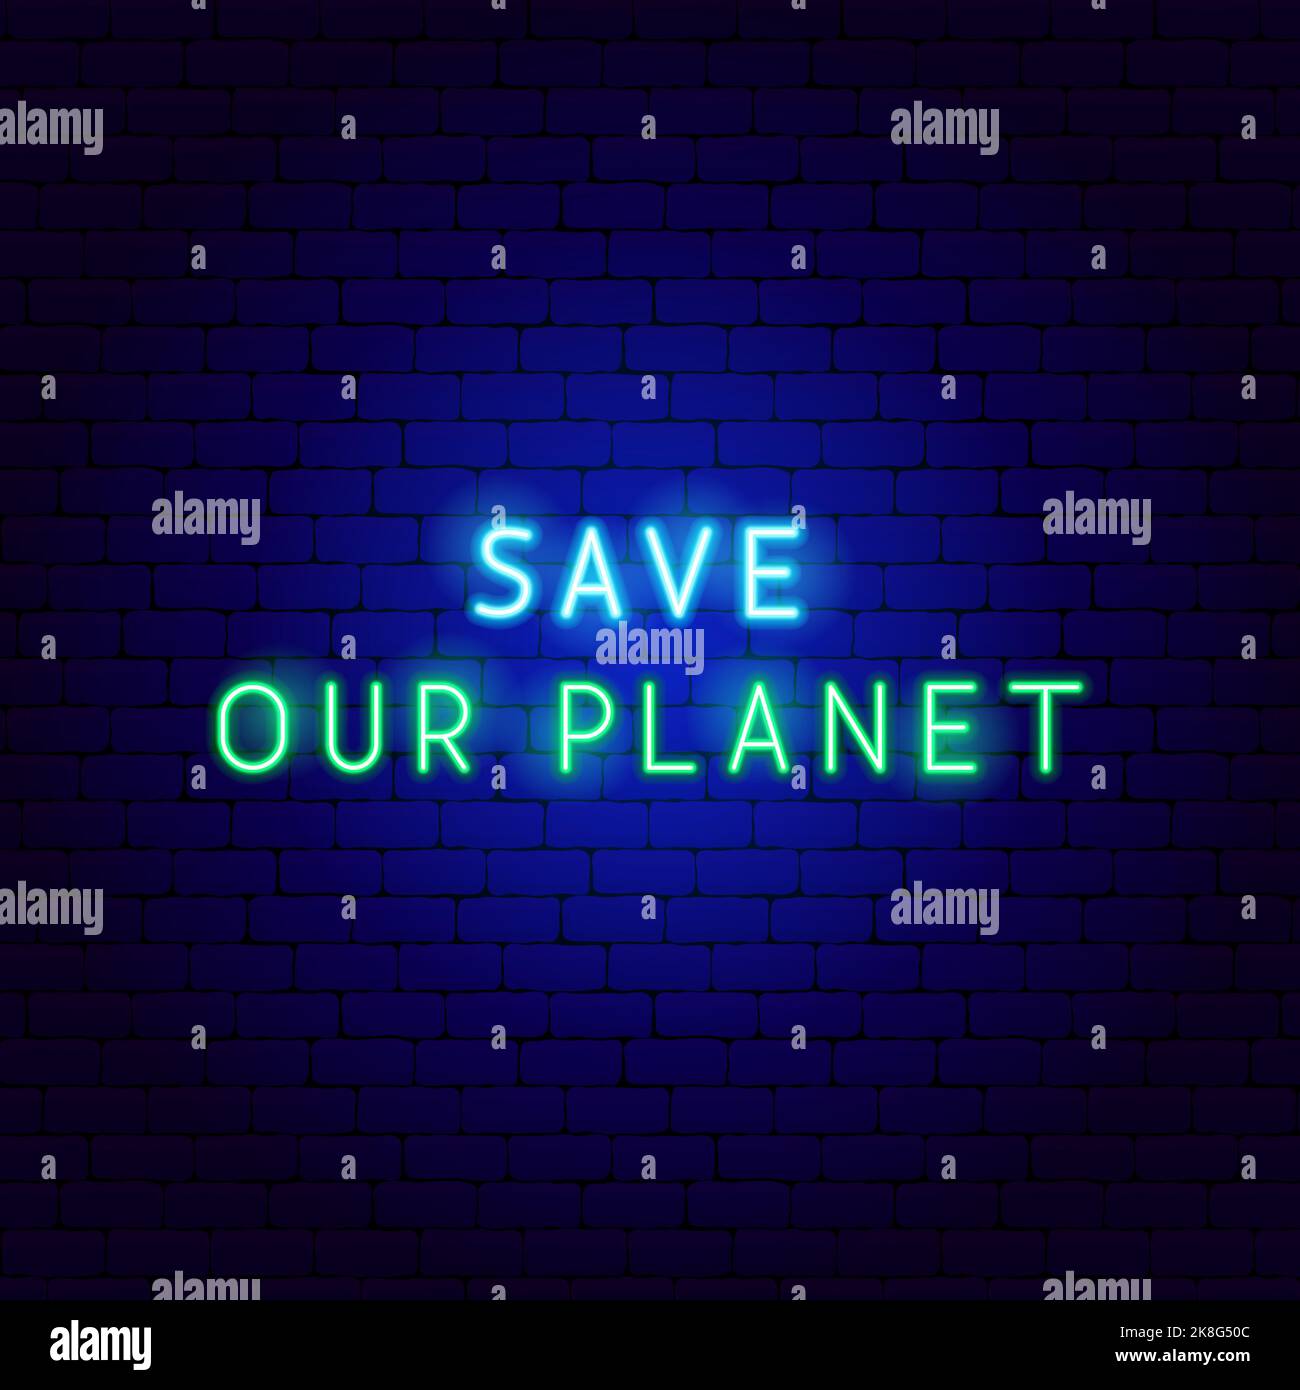 Save Planet Neon Text Stock Vector